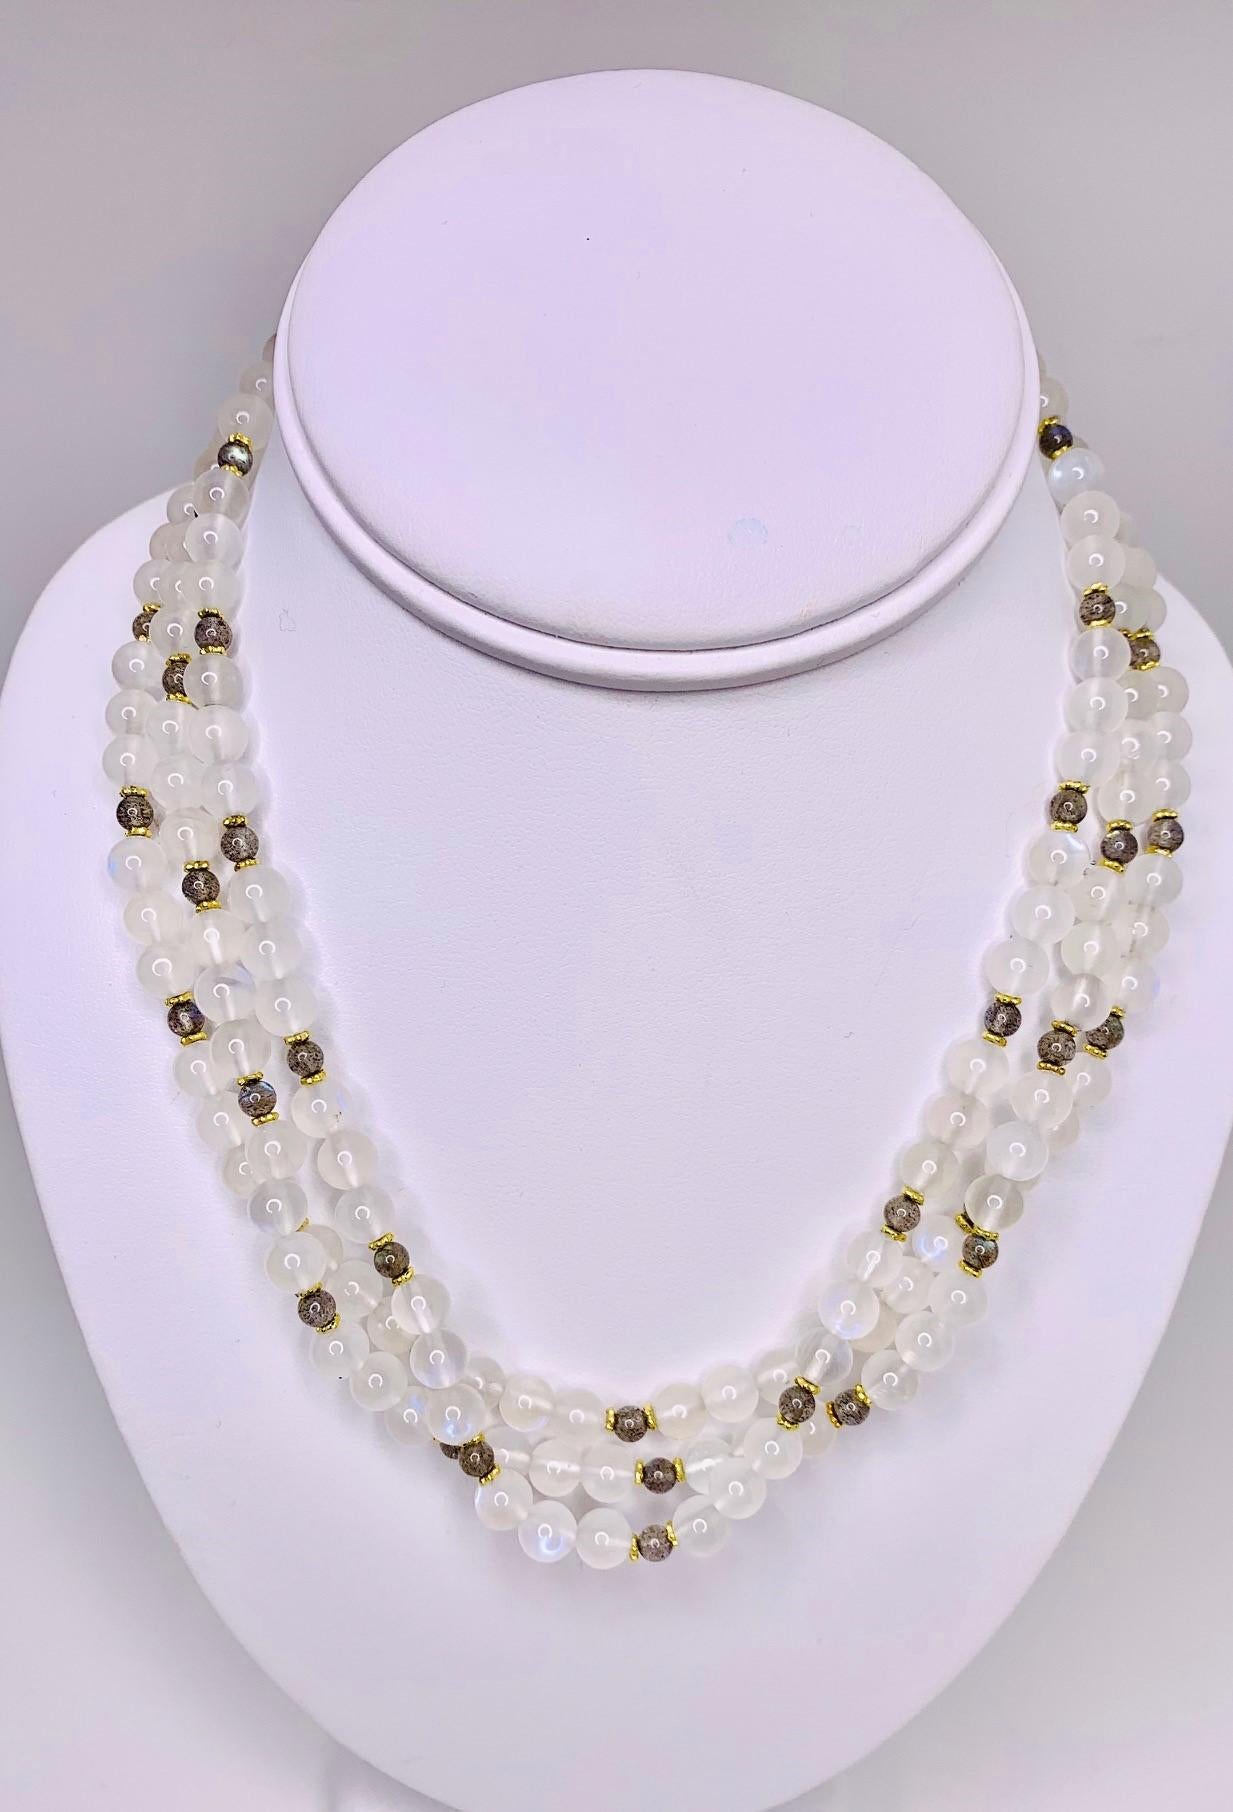 3-Strand Moonstone and Labradorite Beaded Necklace with 18k Yellow Gold Accents In New Condition For Sale In Los Angeles, CA